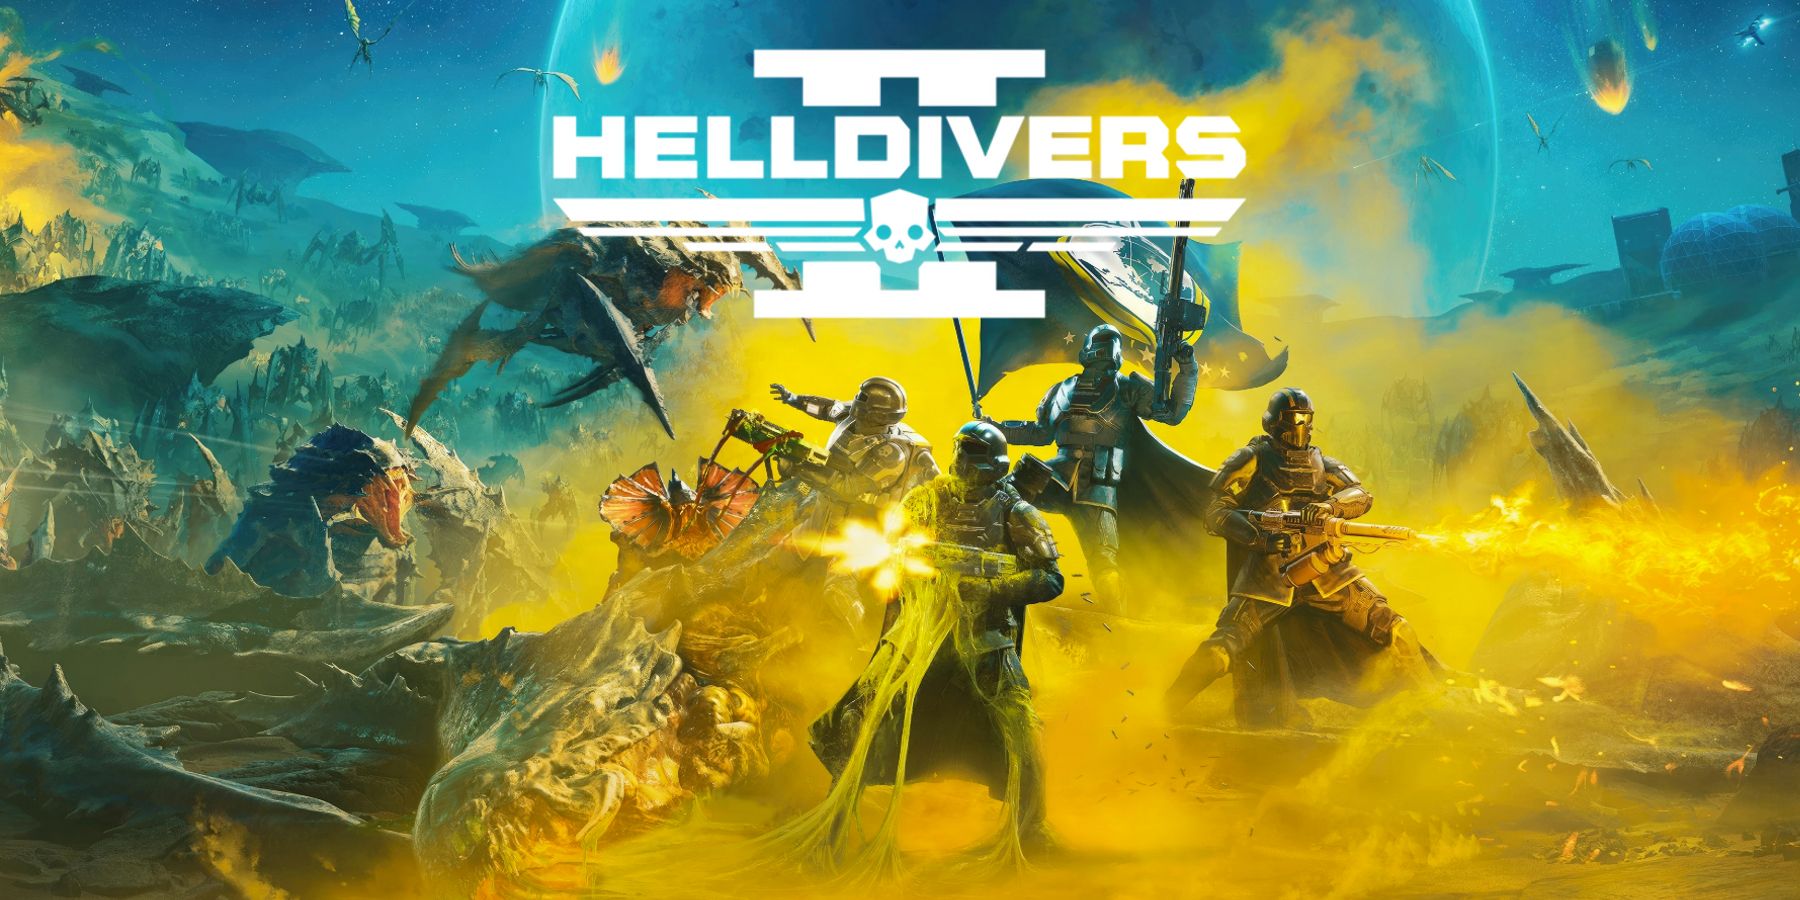 Helldivers 2 Review